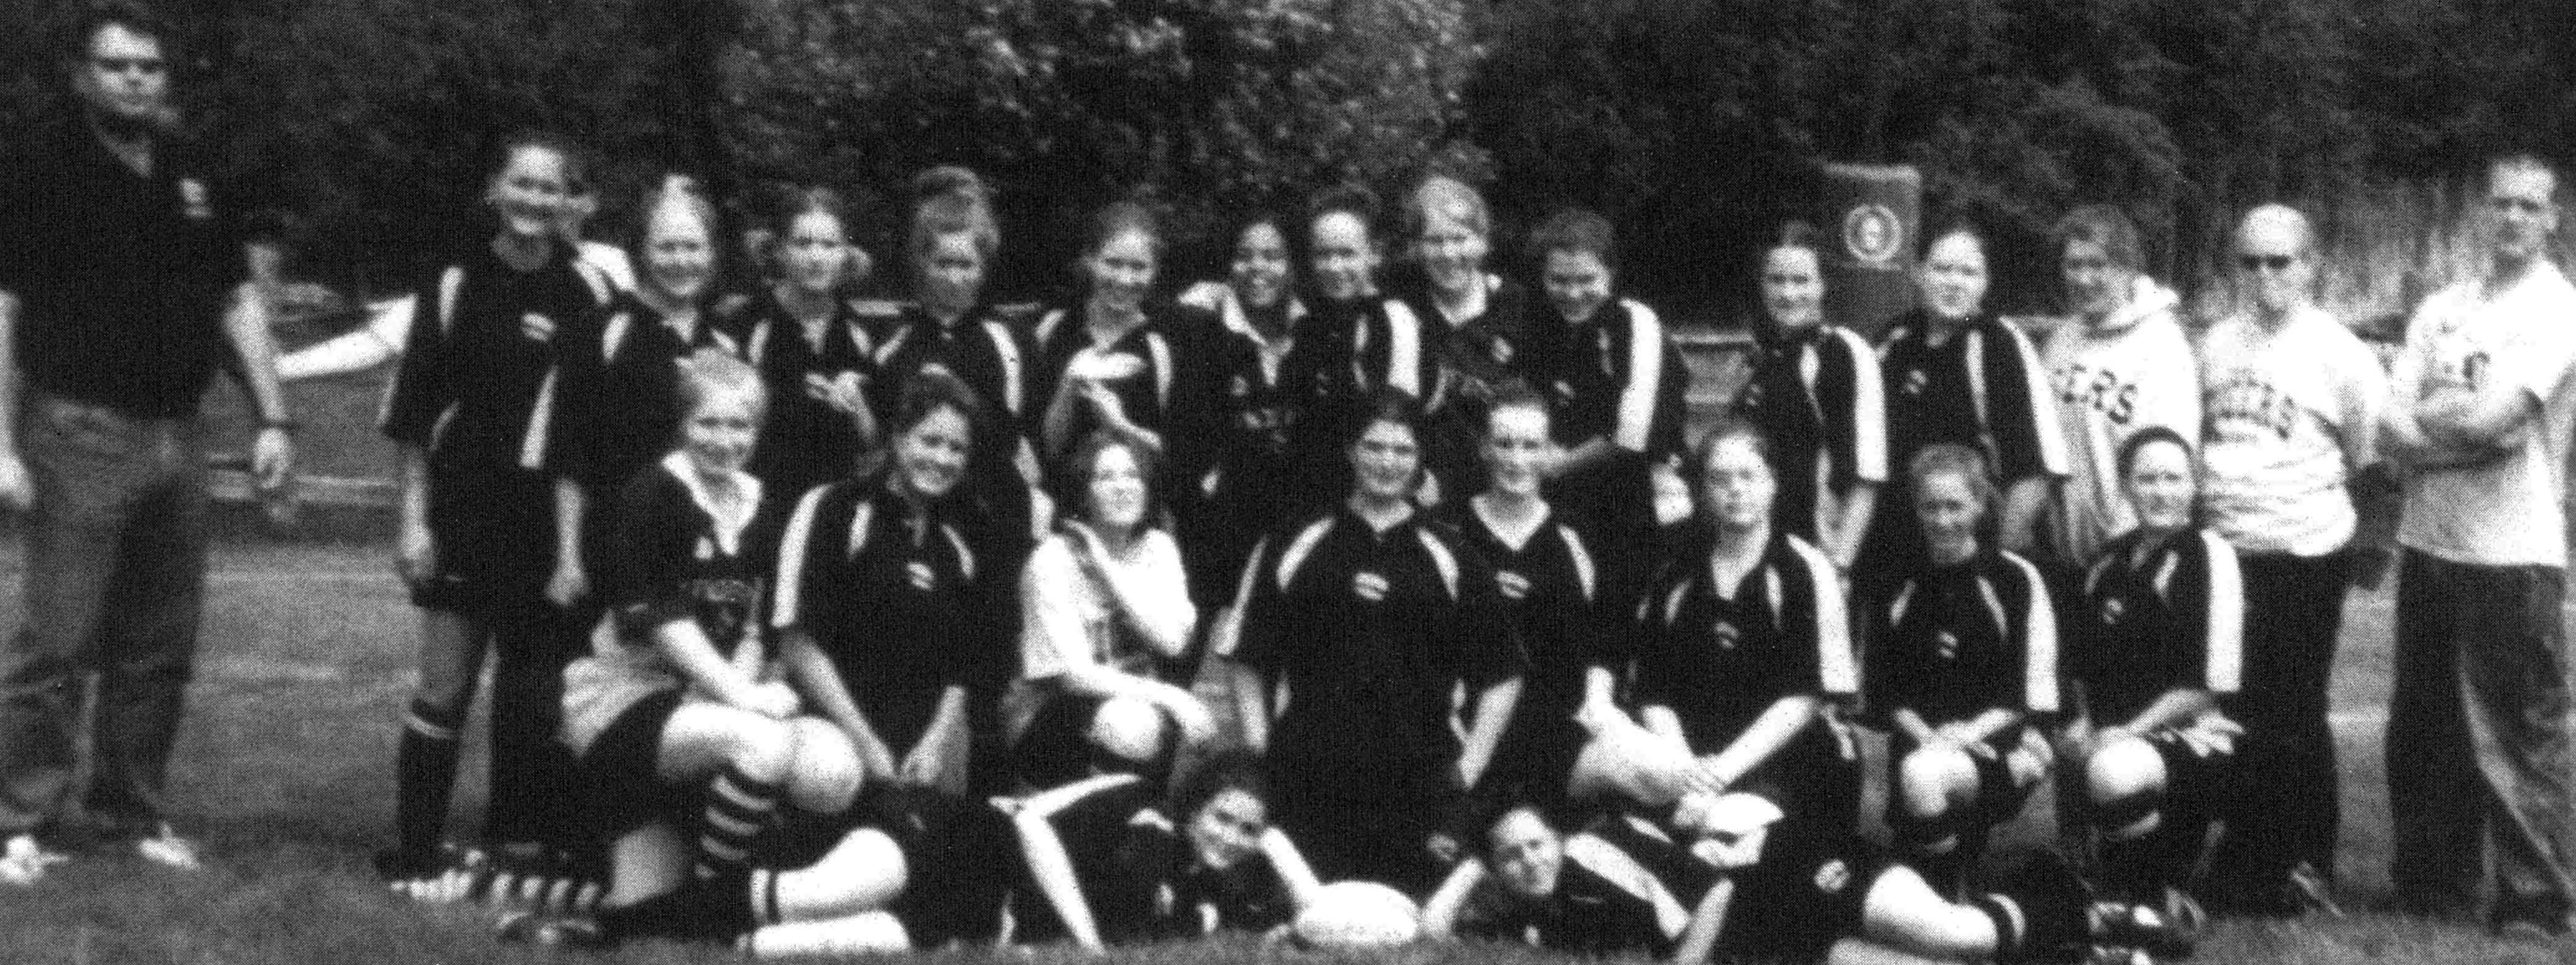 (Click to magnify - original is depressingly of poor quality; scanned in high resolution but that can't change the original low resolution photo) FRONT ROW: Meagan Yeadon, Lyndsay Huntley; SECOND ROW: Emily Bradford, Rebecca Lawes, Nikki Menzies, Sarah Bu